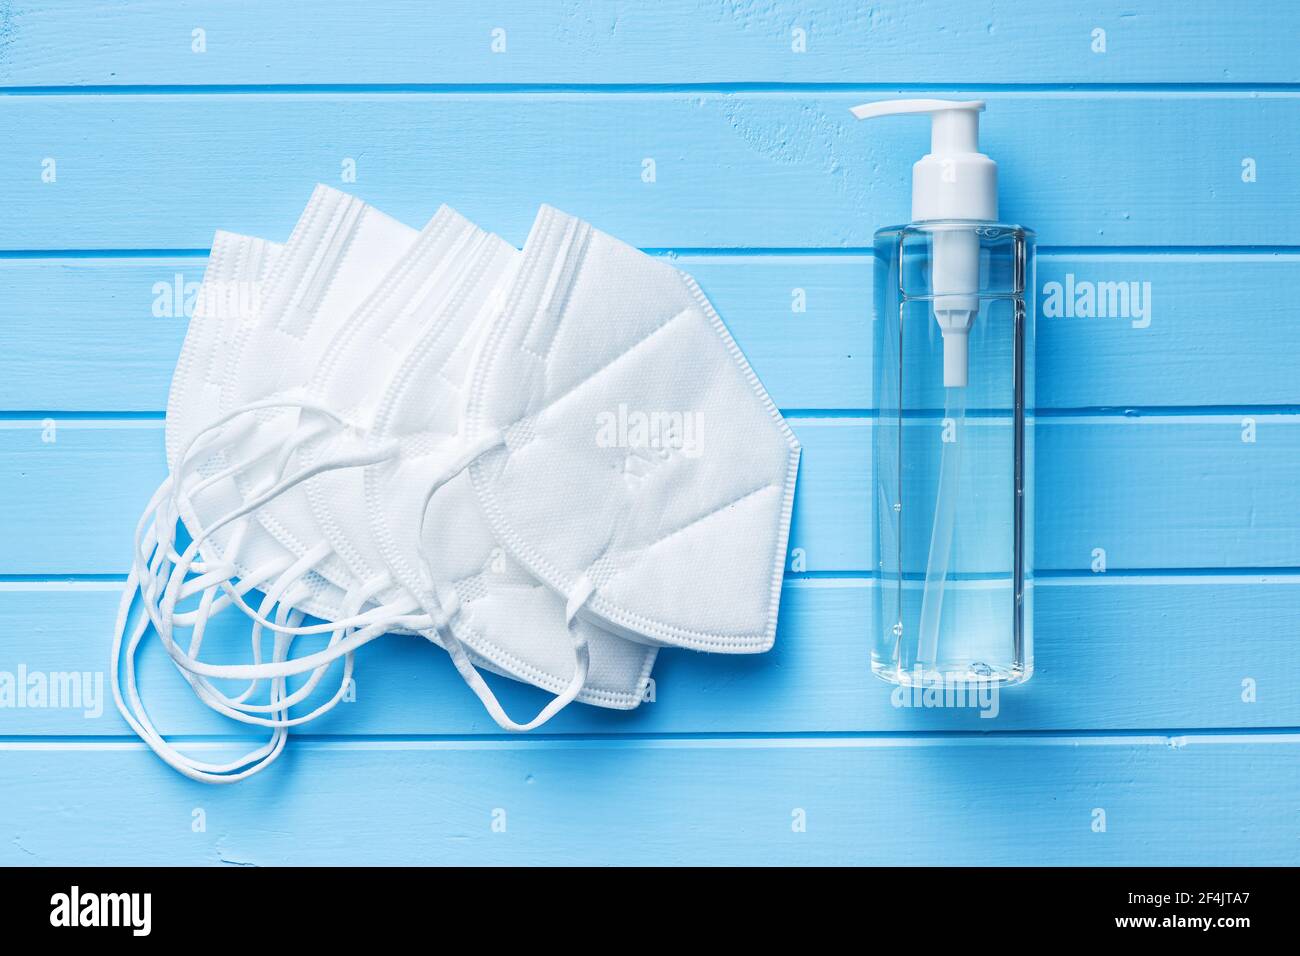 Coronavirus prevention hand sanitizer and kn95 respirator mask. Hand disinfectant gel in pump bottle on blue table. Top view. Stock Photo